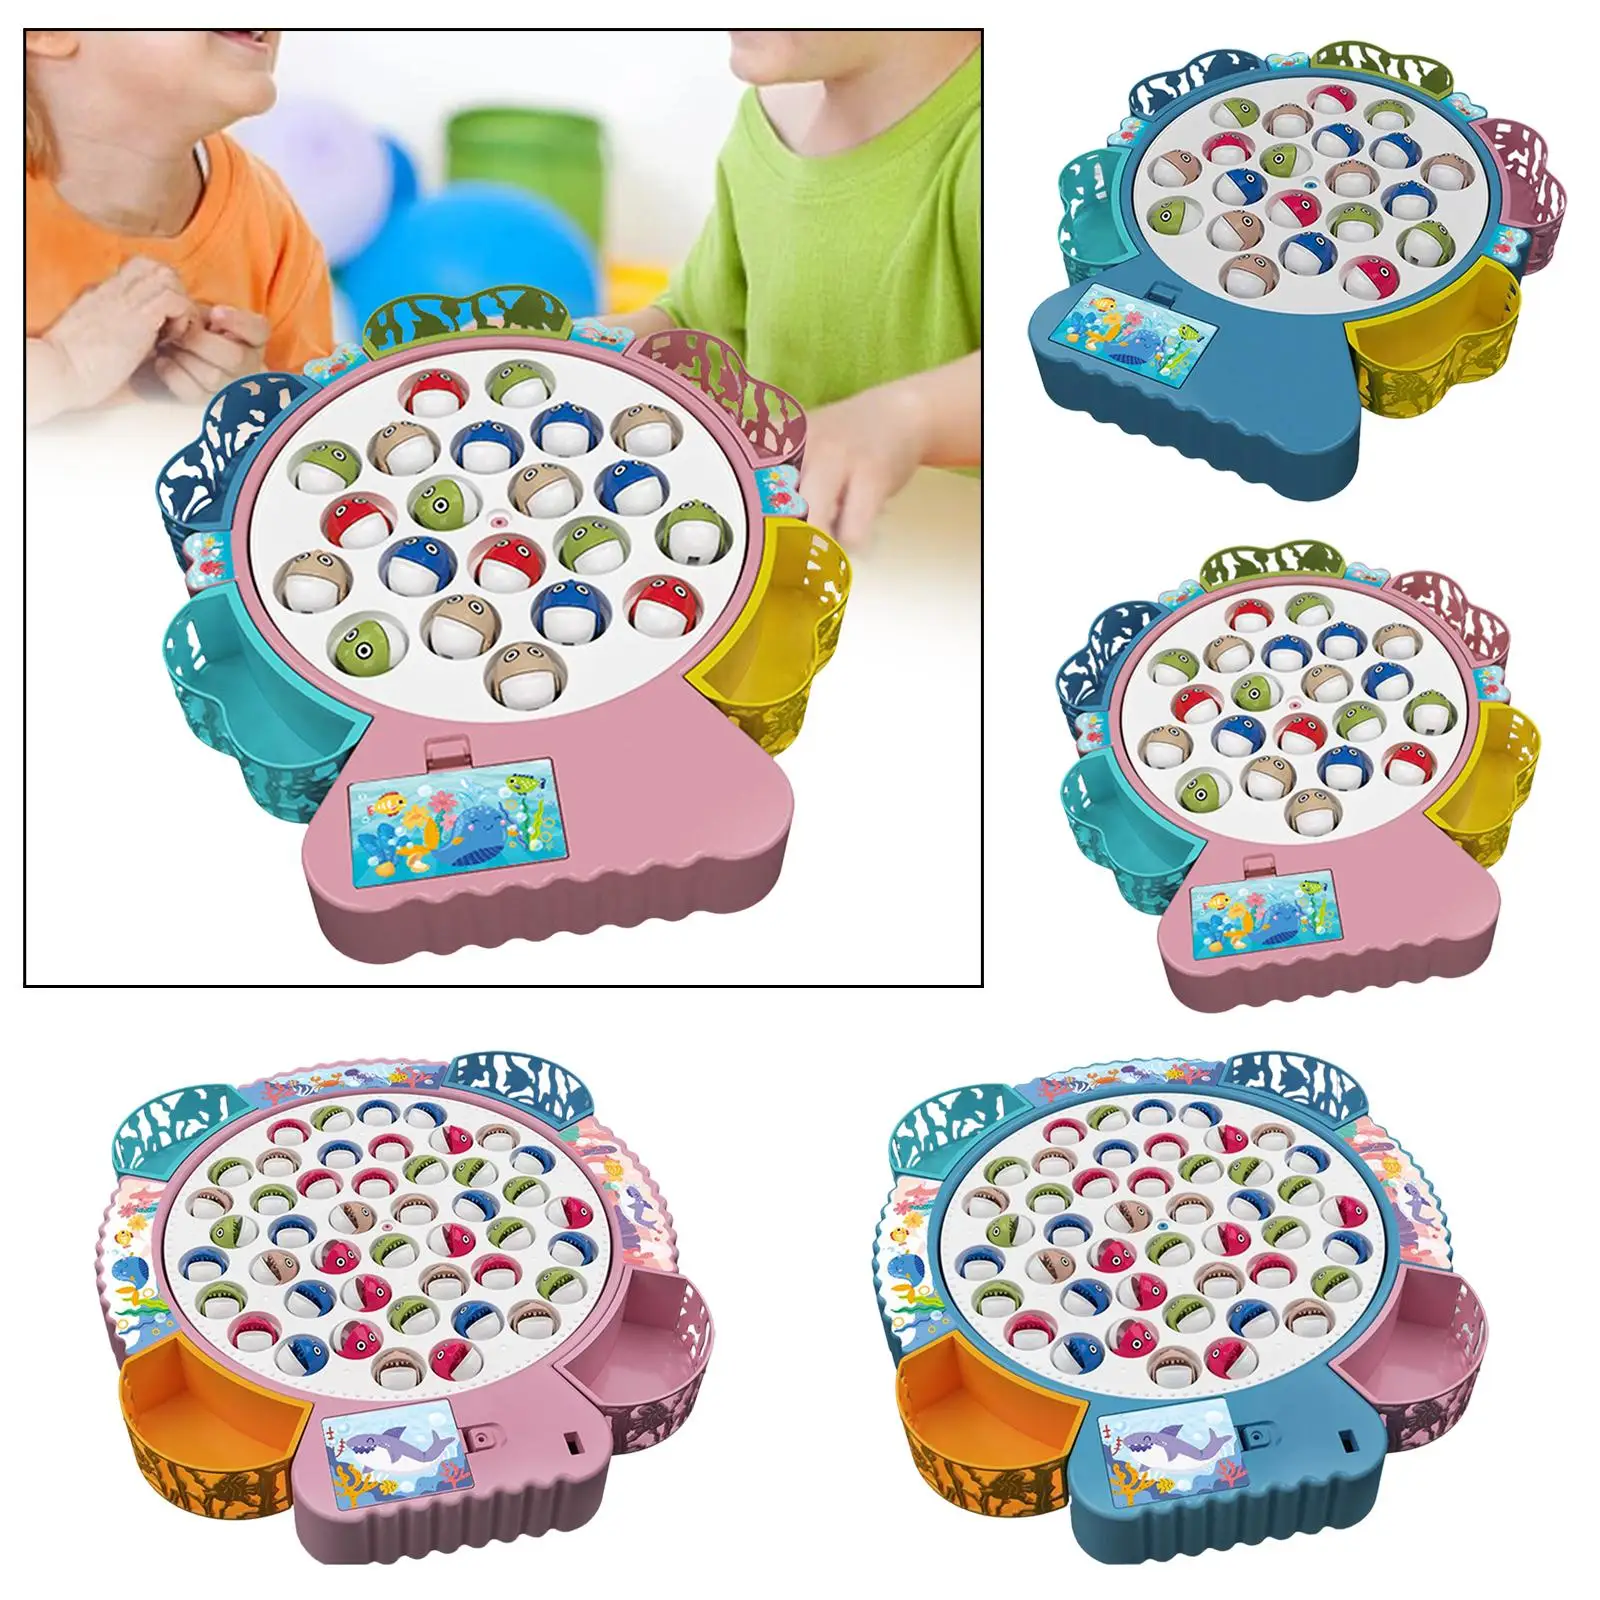 Rotating Fishing Game Educational Board Game Colorful Role Play Fine Motor Skills for Toddlers Backyards Family Kids Party Favor